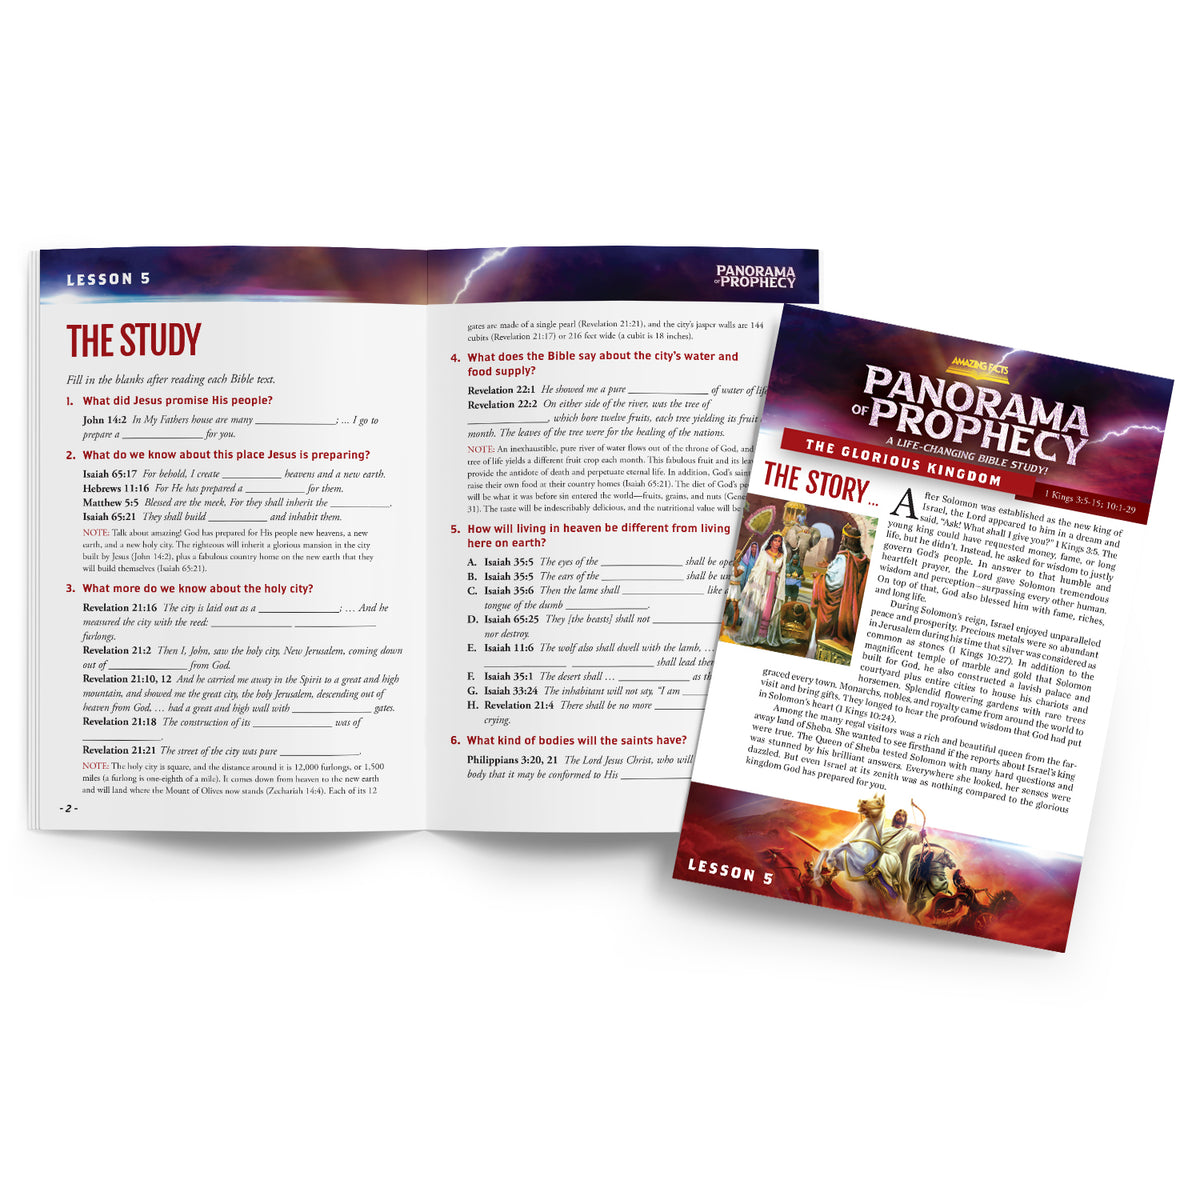 Panorama of Prophecy: The Glorious Kingdom Study Guide 05 by Doug Batchelor